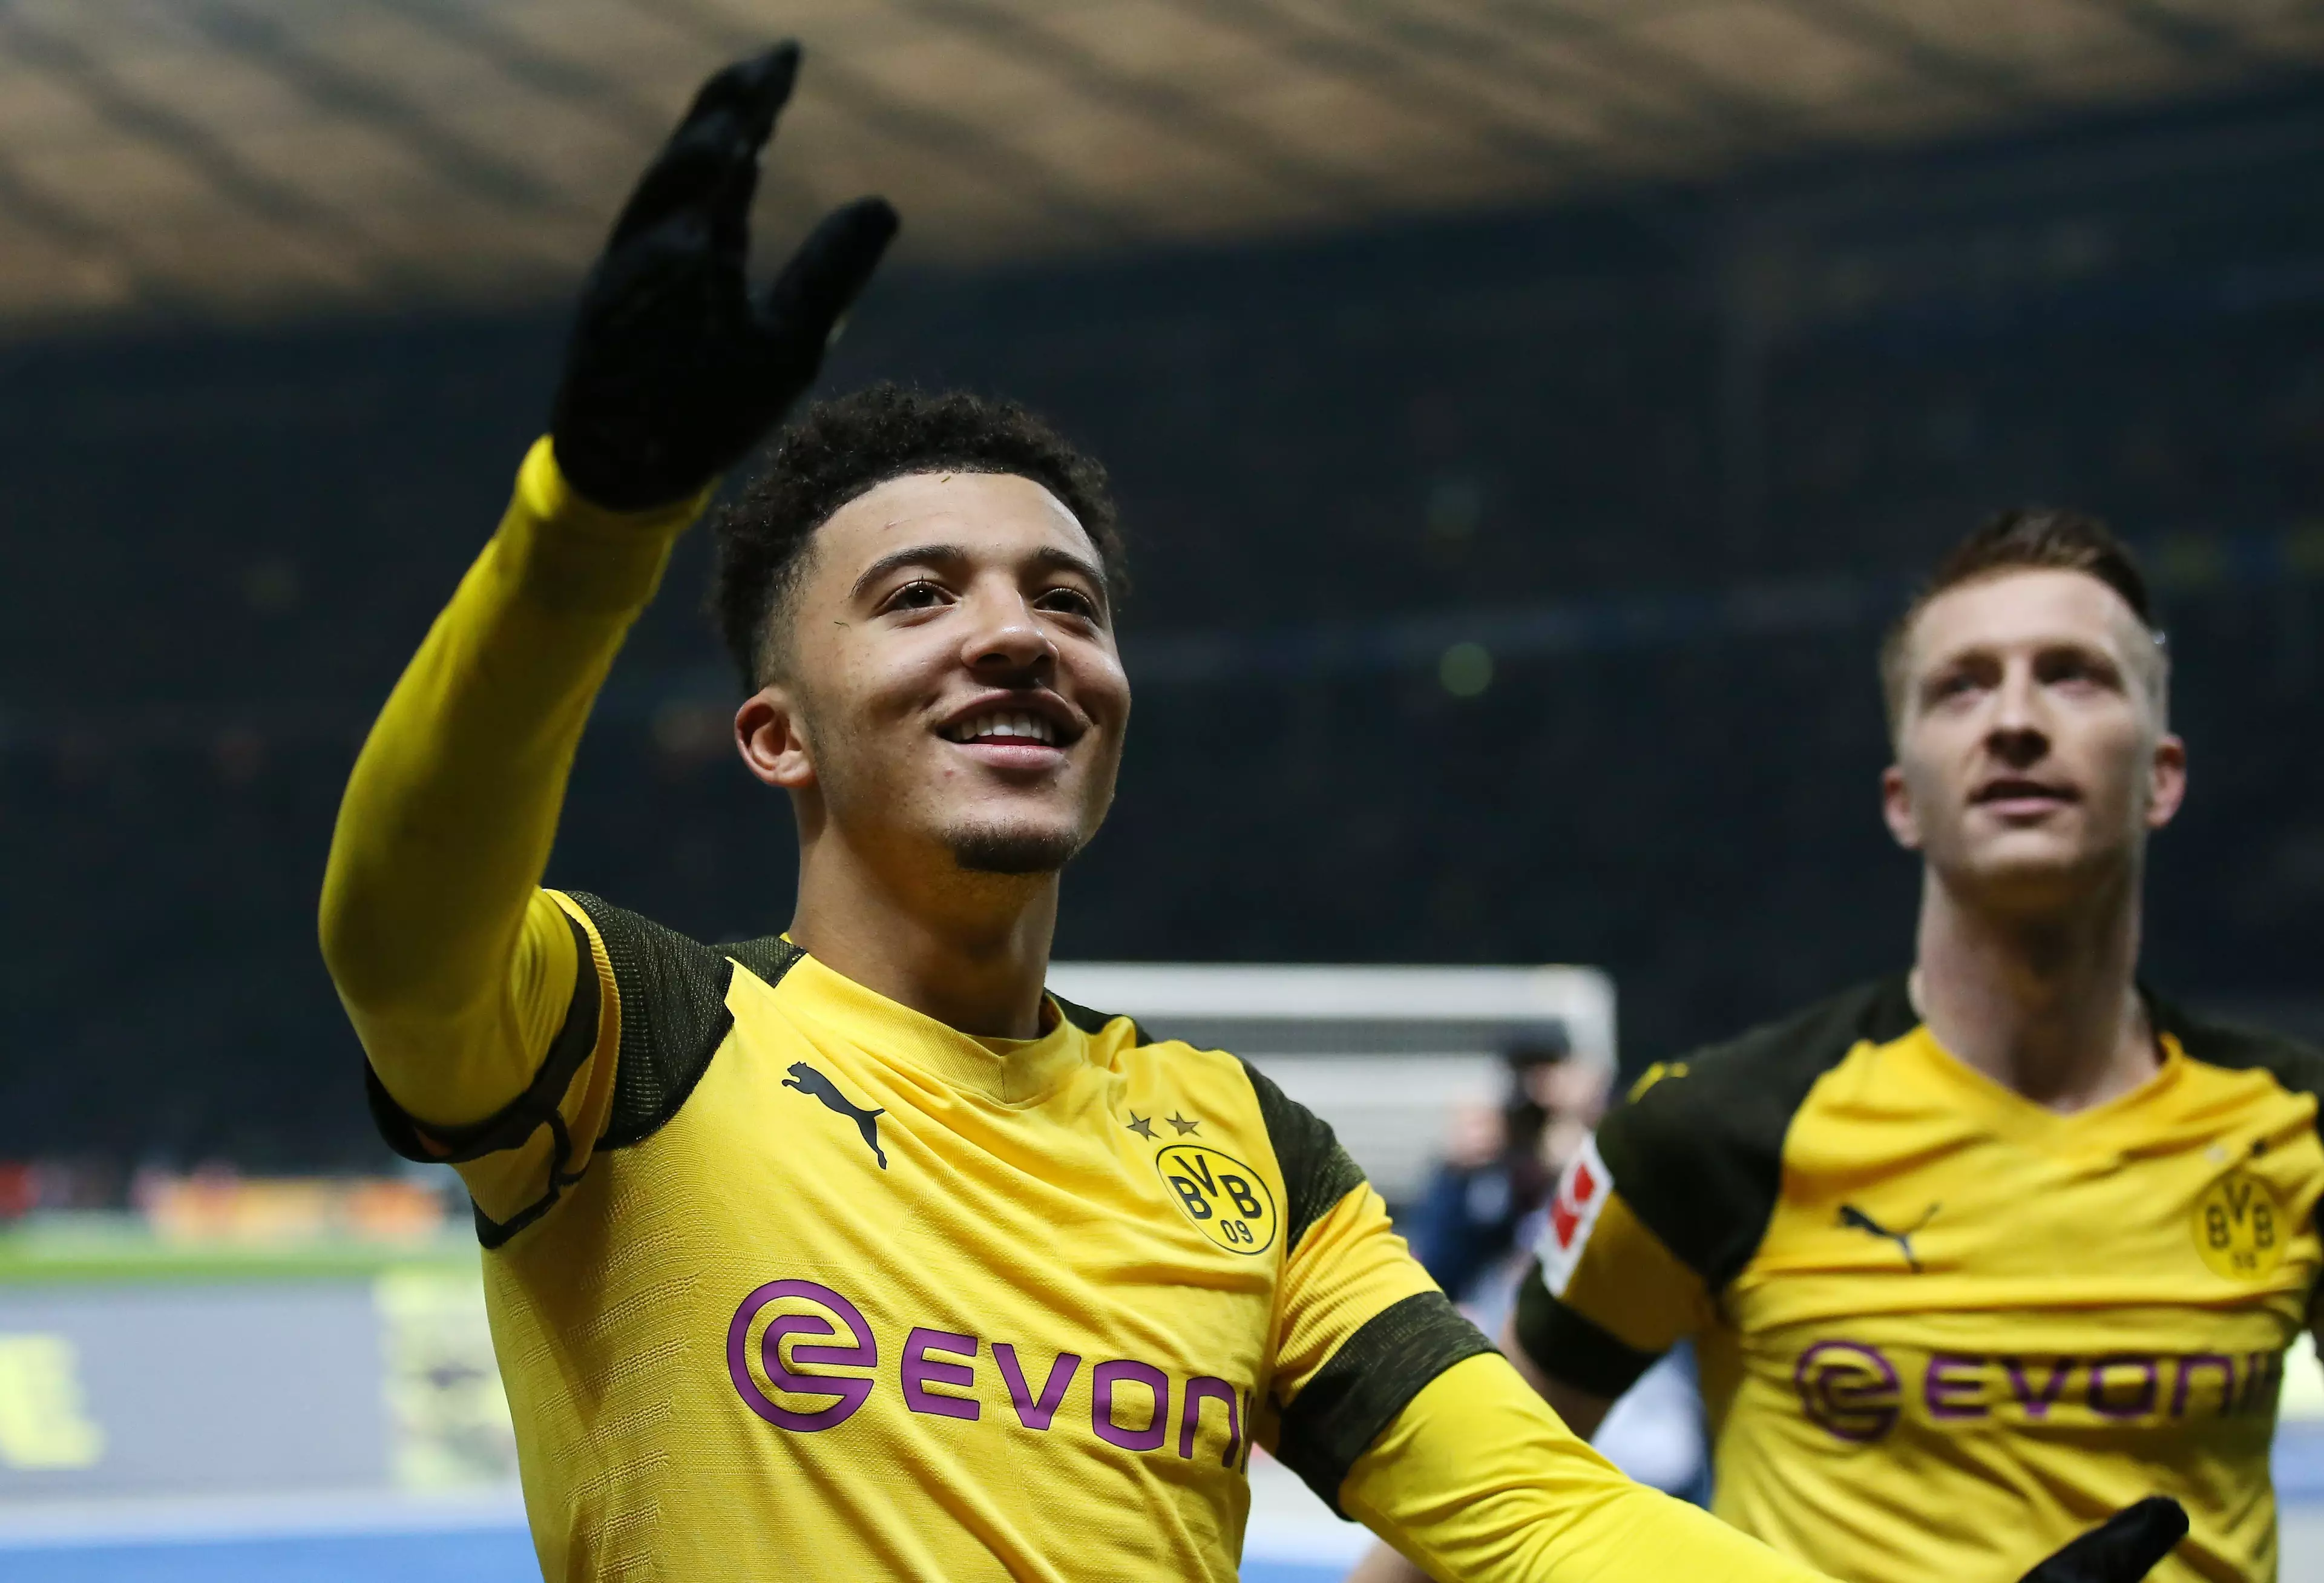 Sancho is one of the hottest young players around right now. Image: PA Images